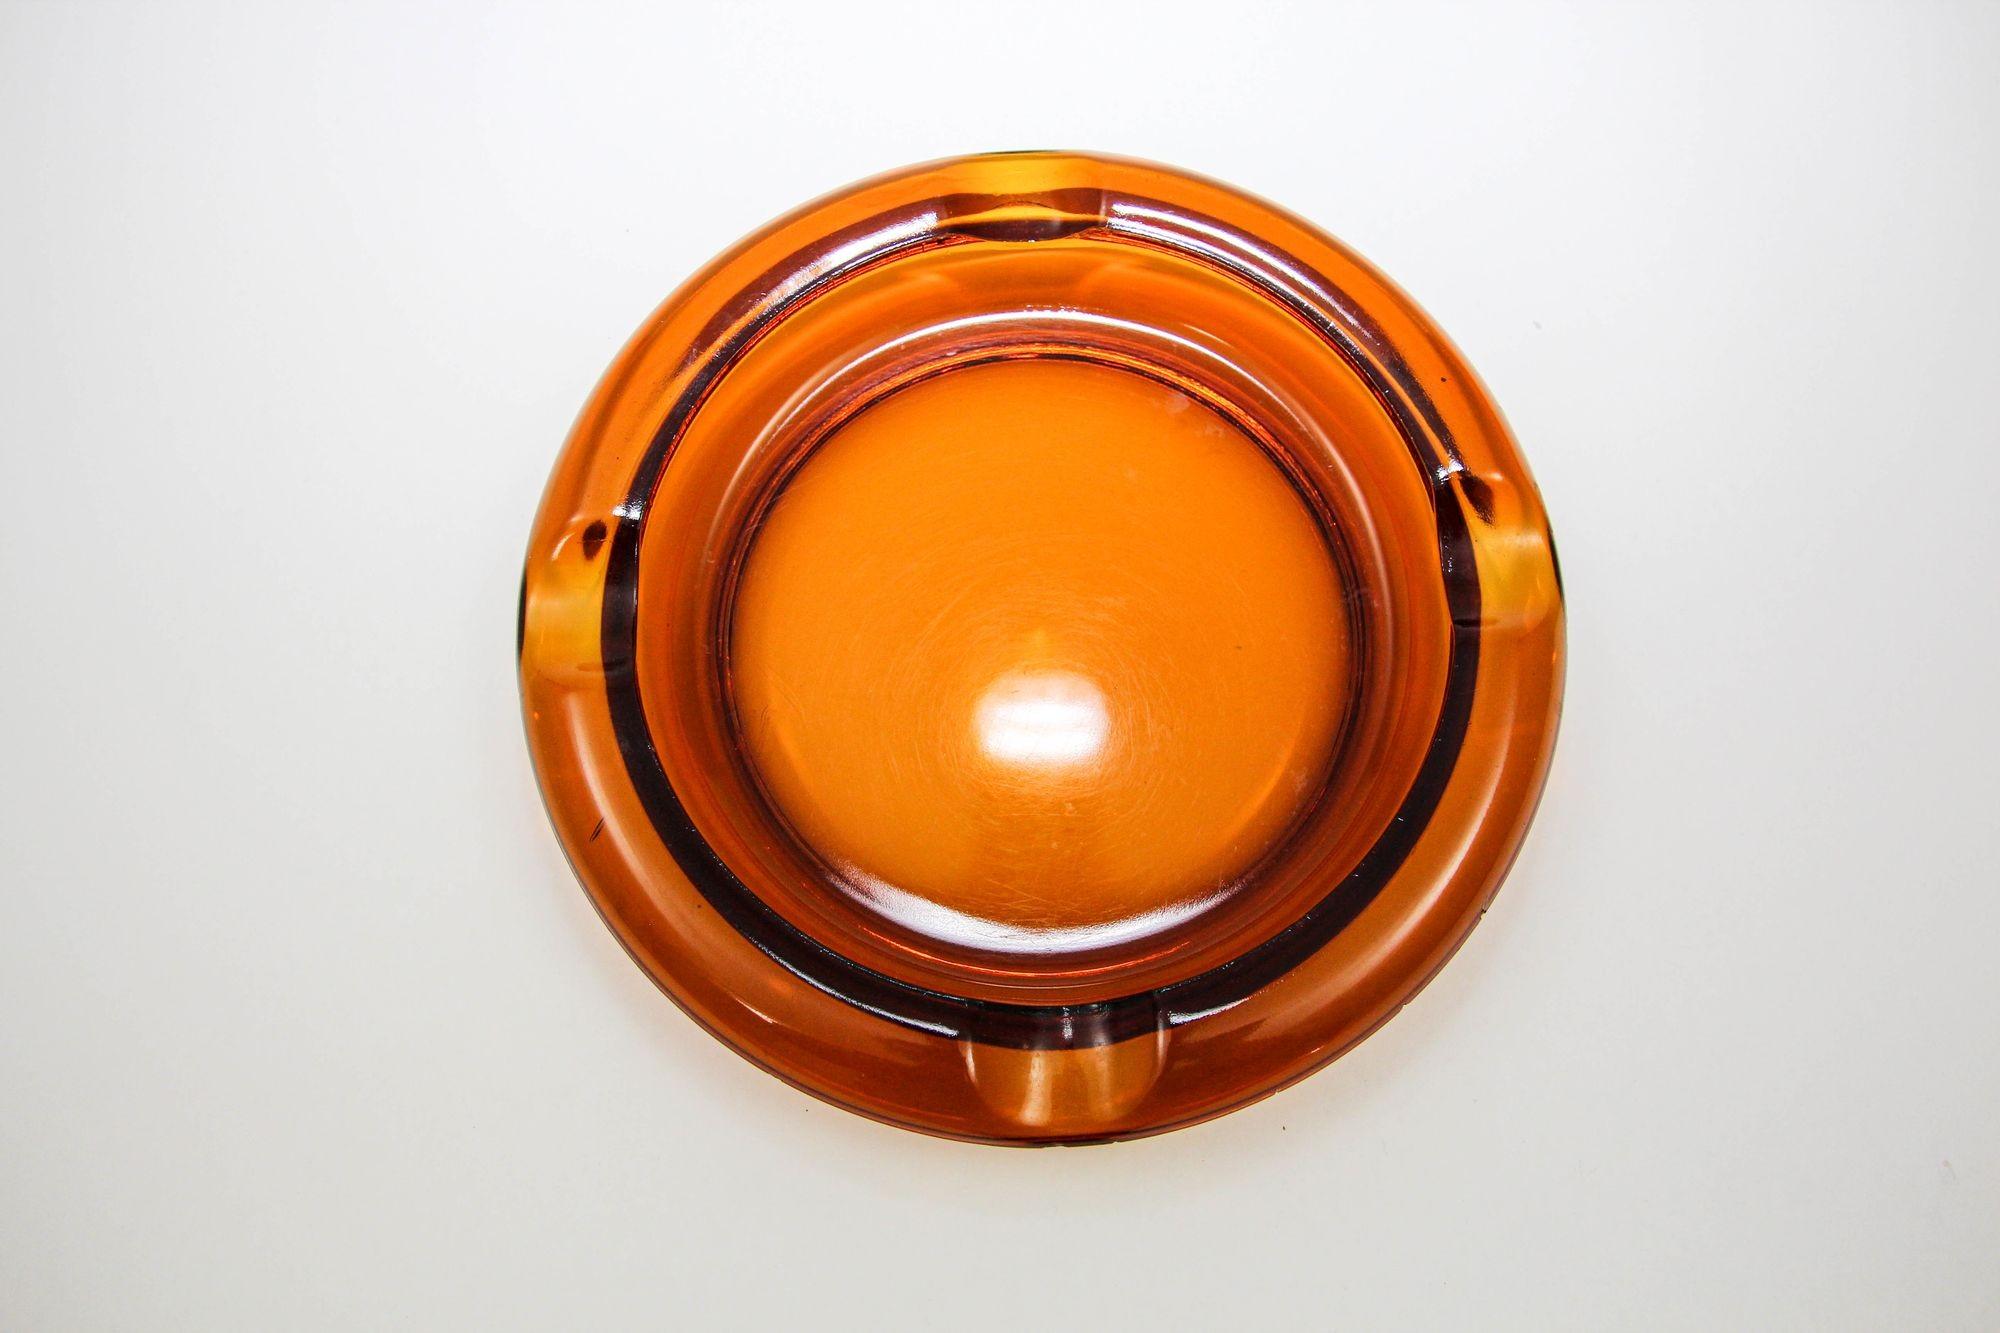 Large vintage Moroccan amber glass ashtrays from the 1960s 1970s.
Vintage Hazel Atlas amber large round form cigar ashtray.
Vintage hazel atlas Moroccan amber yellow glass ashtray, the color vary with light from yellow amber to dark honey amber.
In